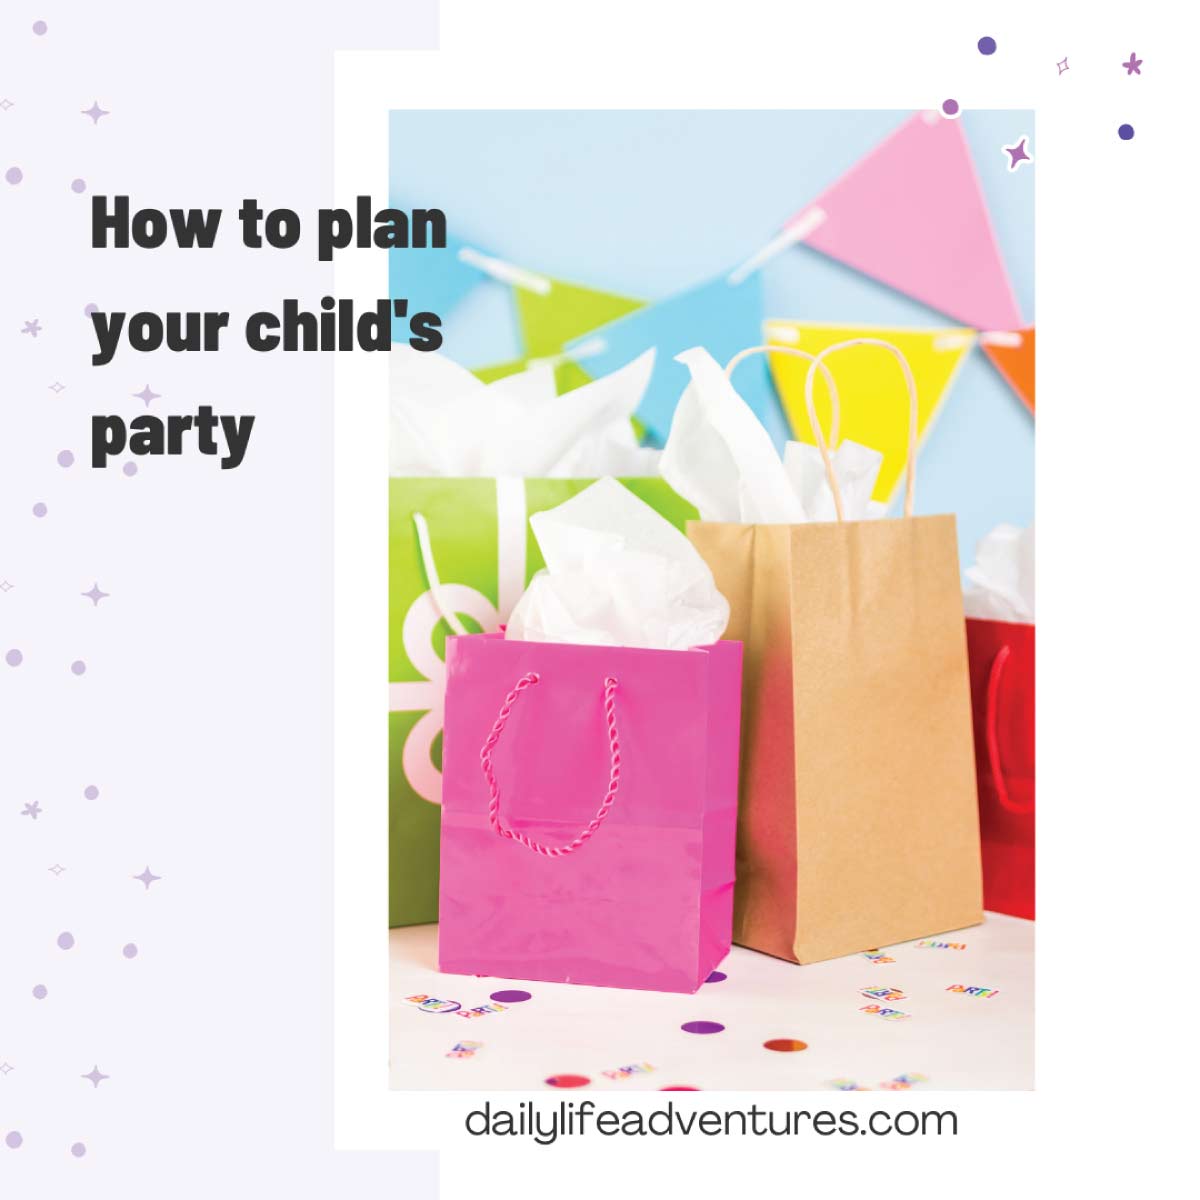 How to Throw a Kids’ Party That They’ll Never Forget